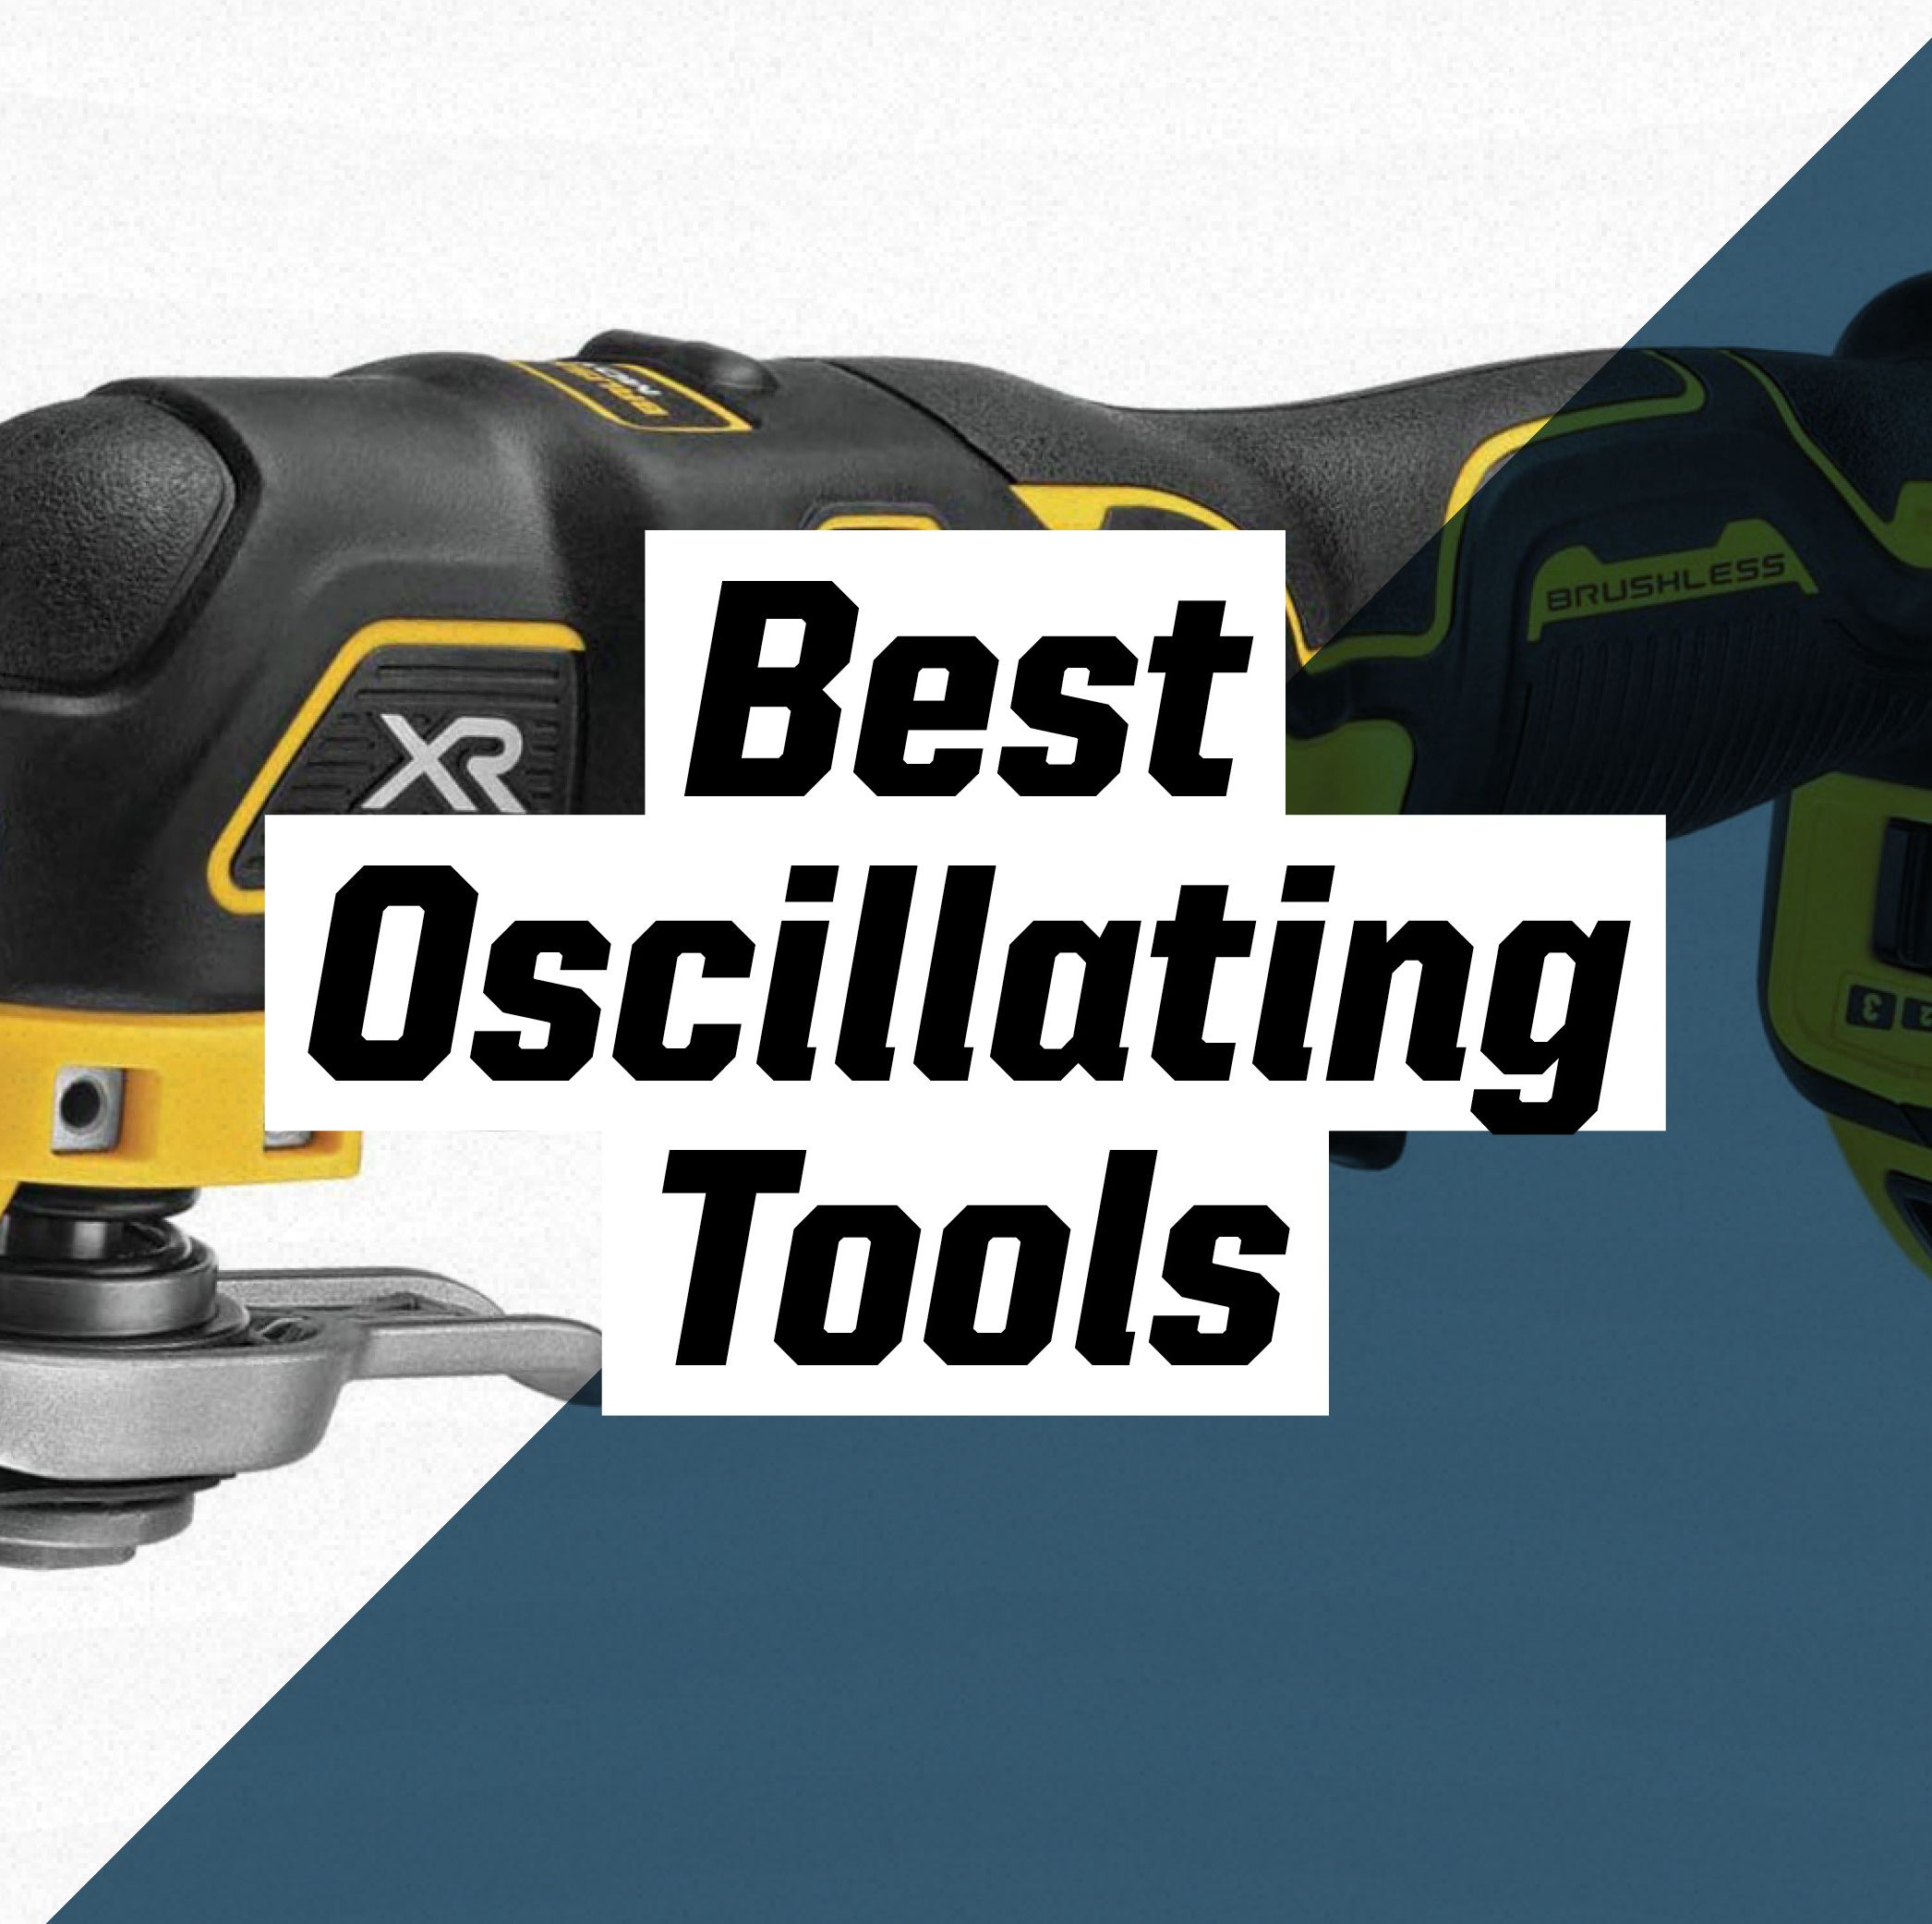 The Best Oscillating Tools to Tackle Any Project